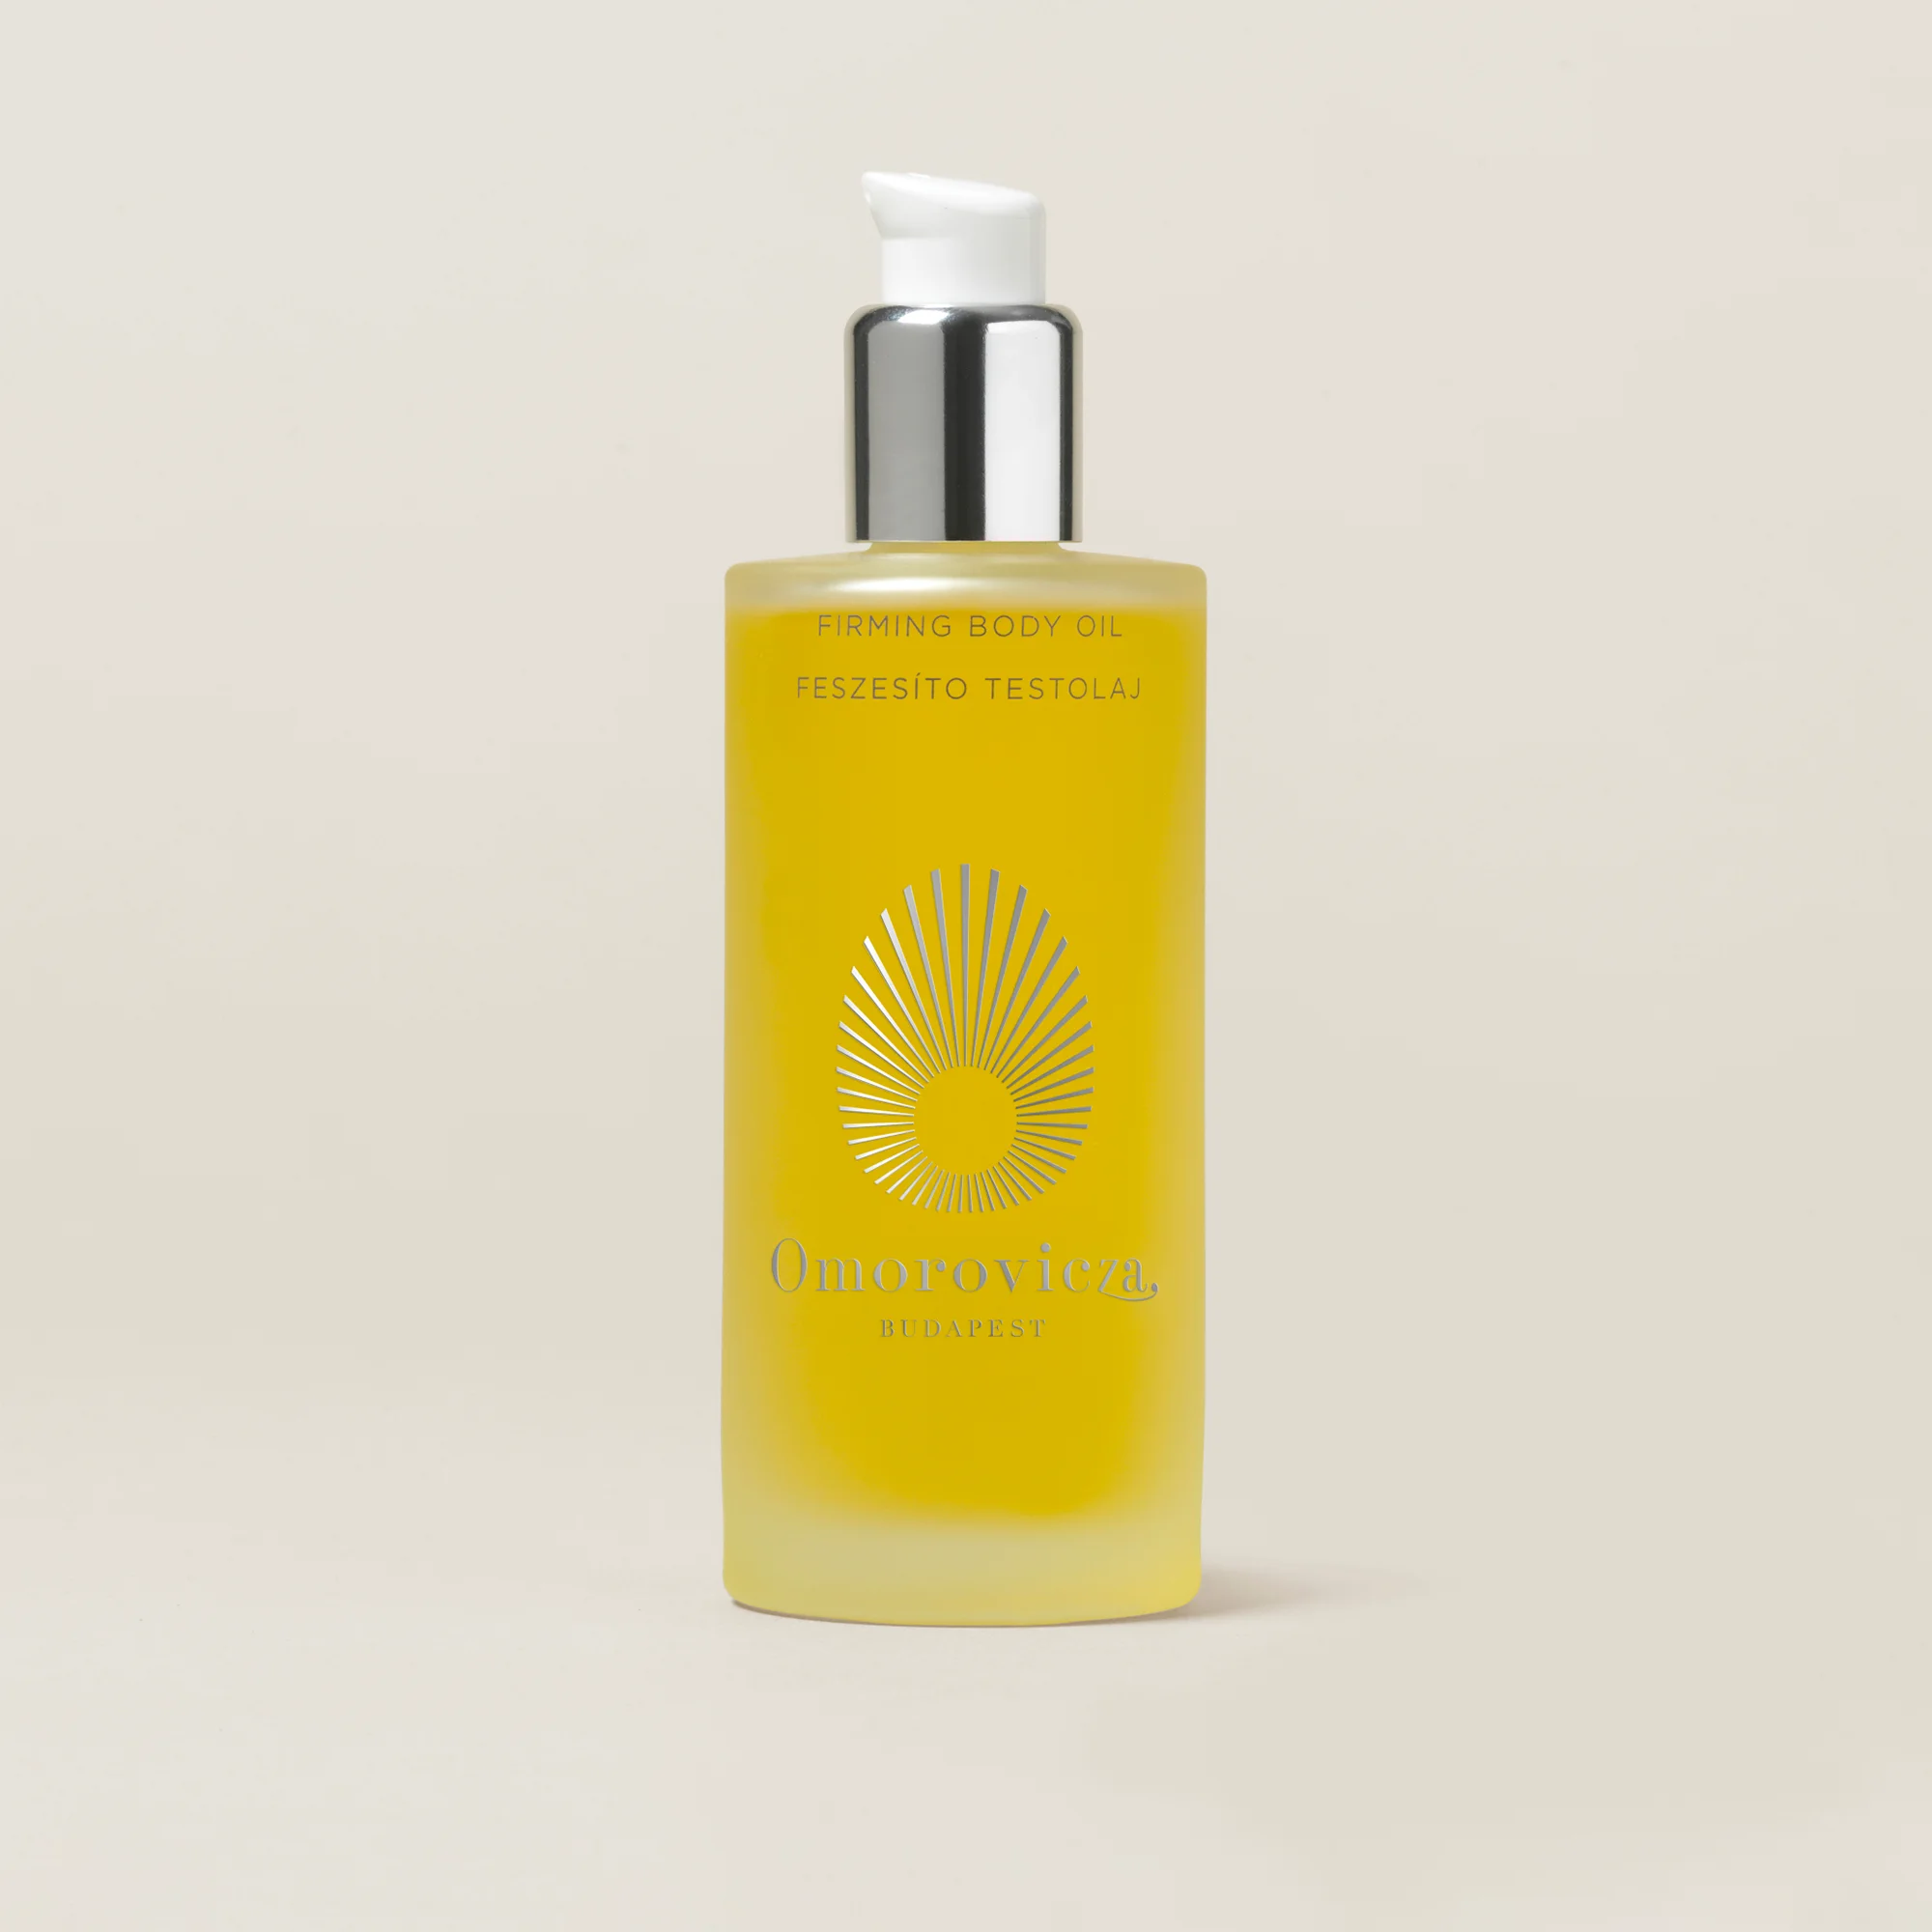 Omorovicza Firming Body Oil (100ml) Image 1